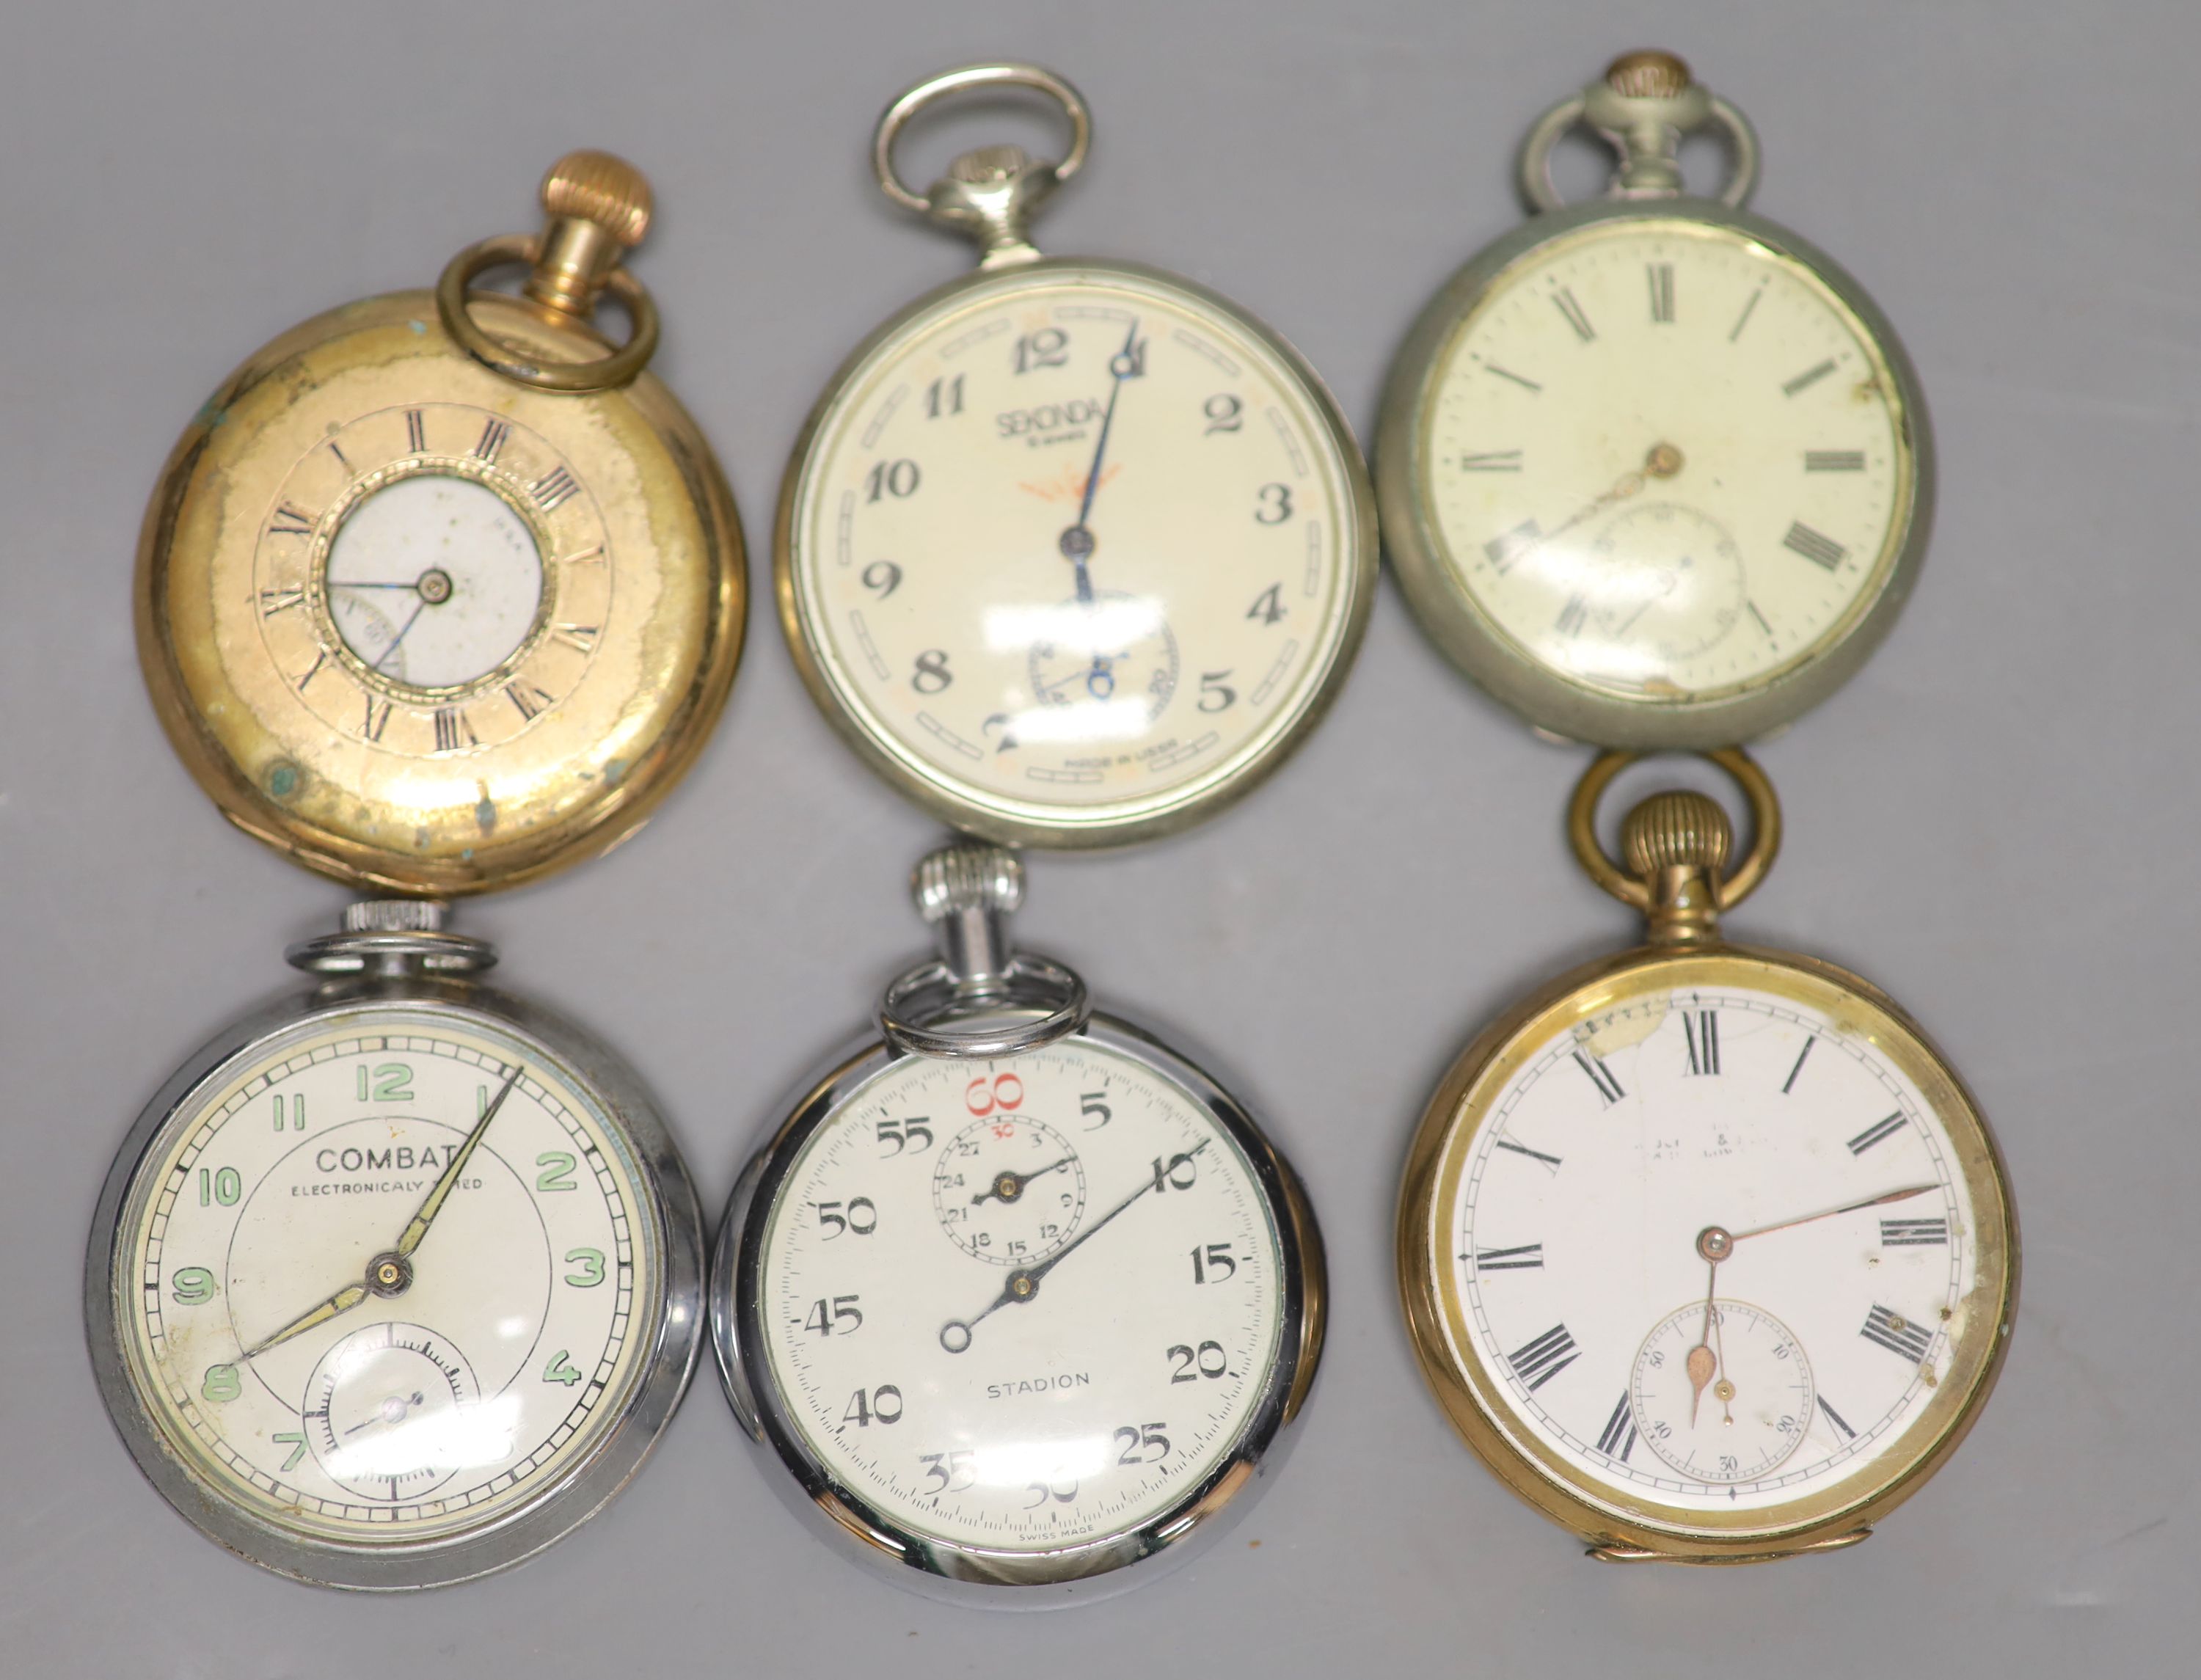 Seven assorted base metal pocket watches including Combat, Stadion and Sekonda(a.f.)